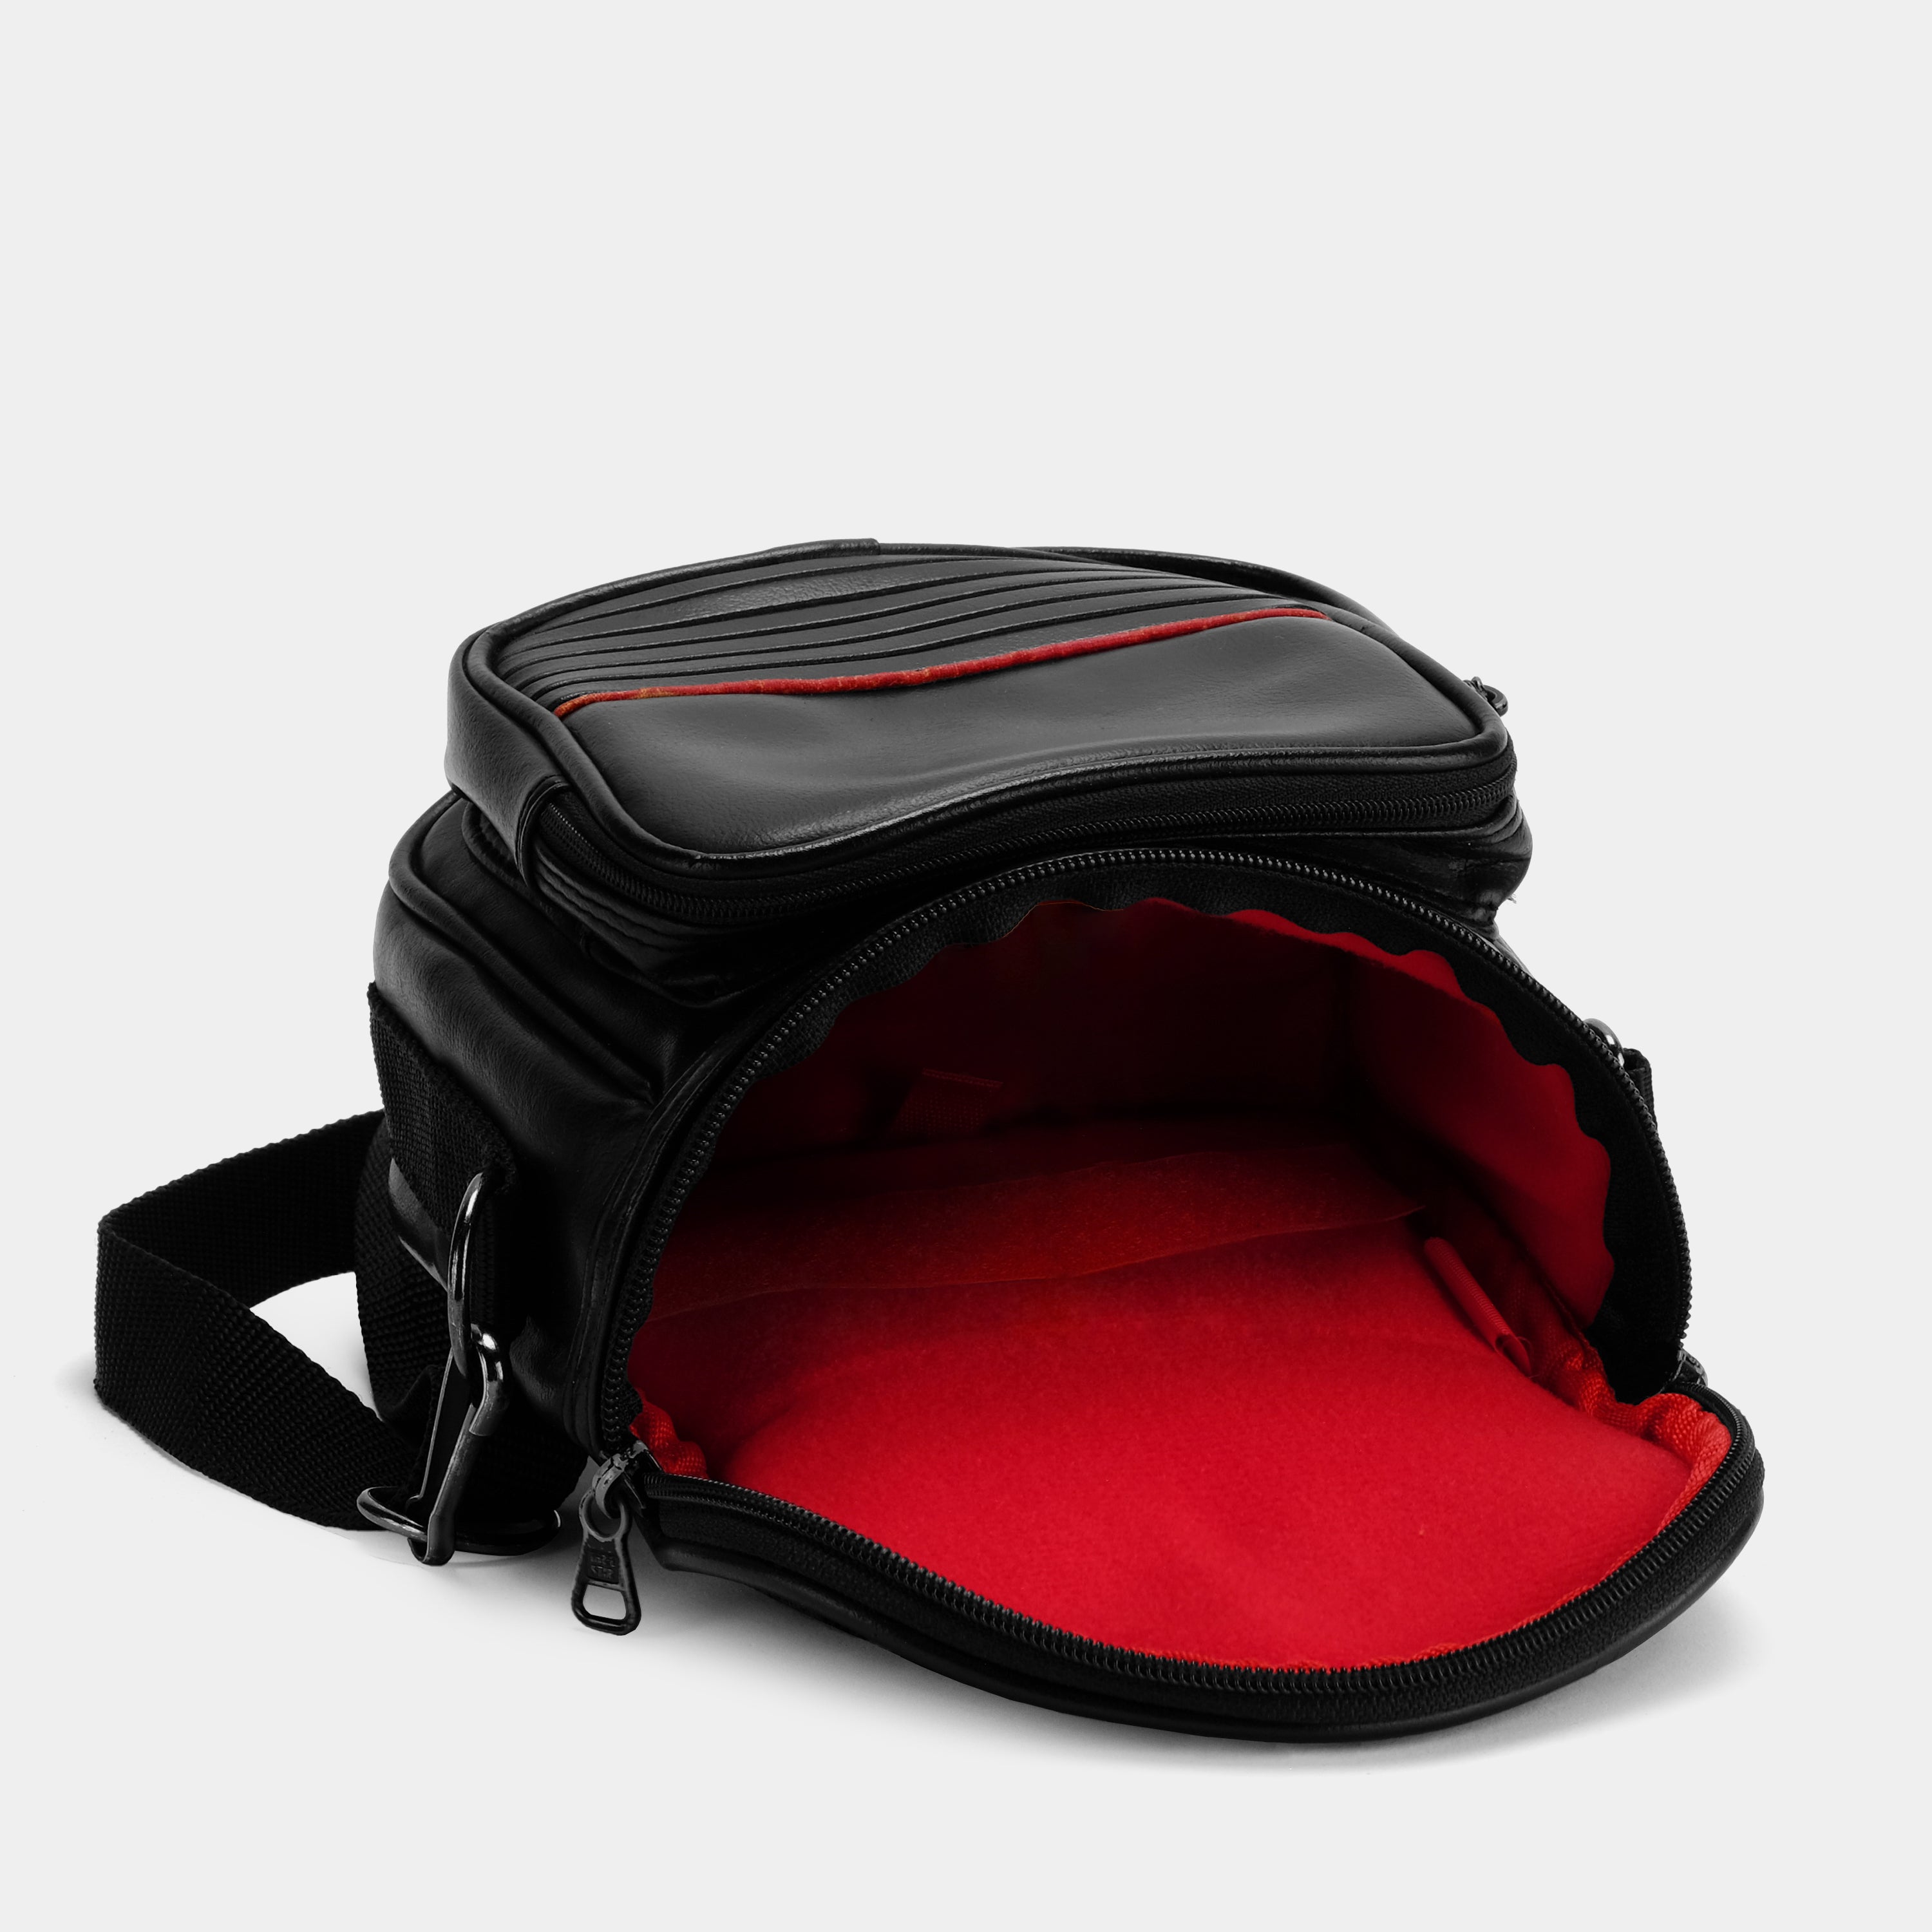 Black Leather Camera Bag with Red Stripe